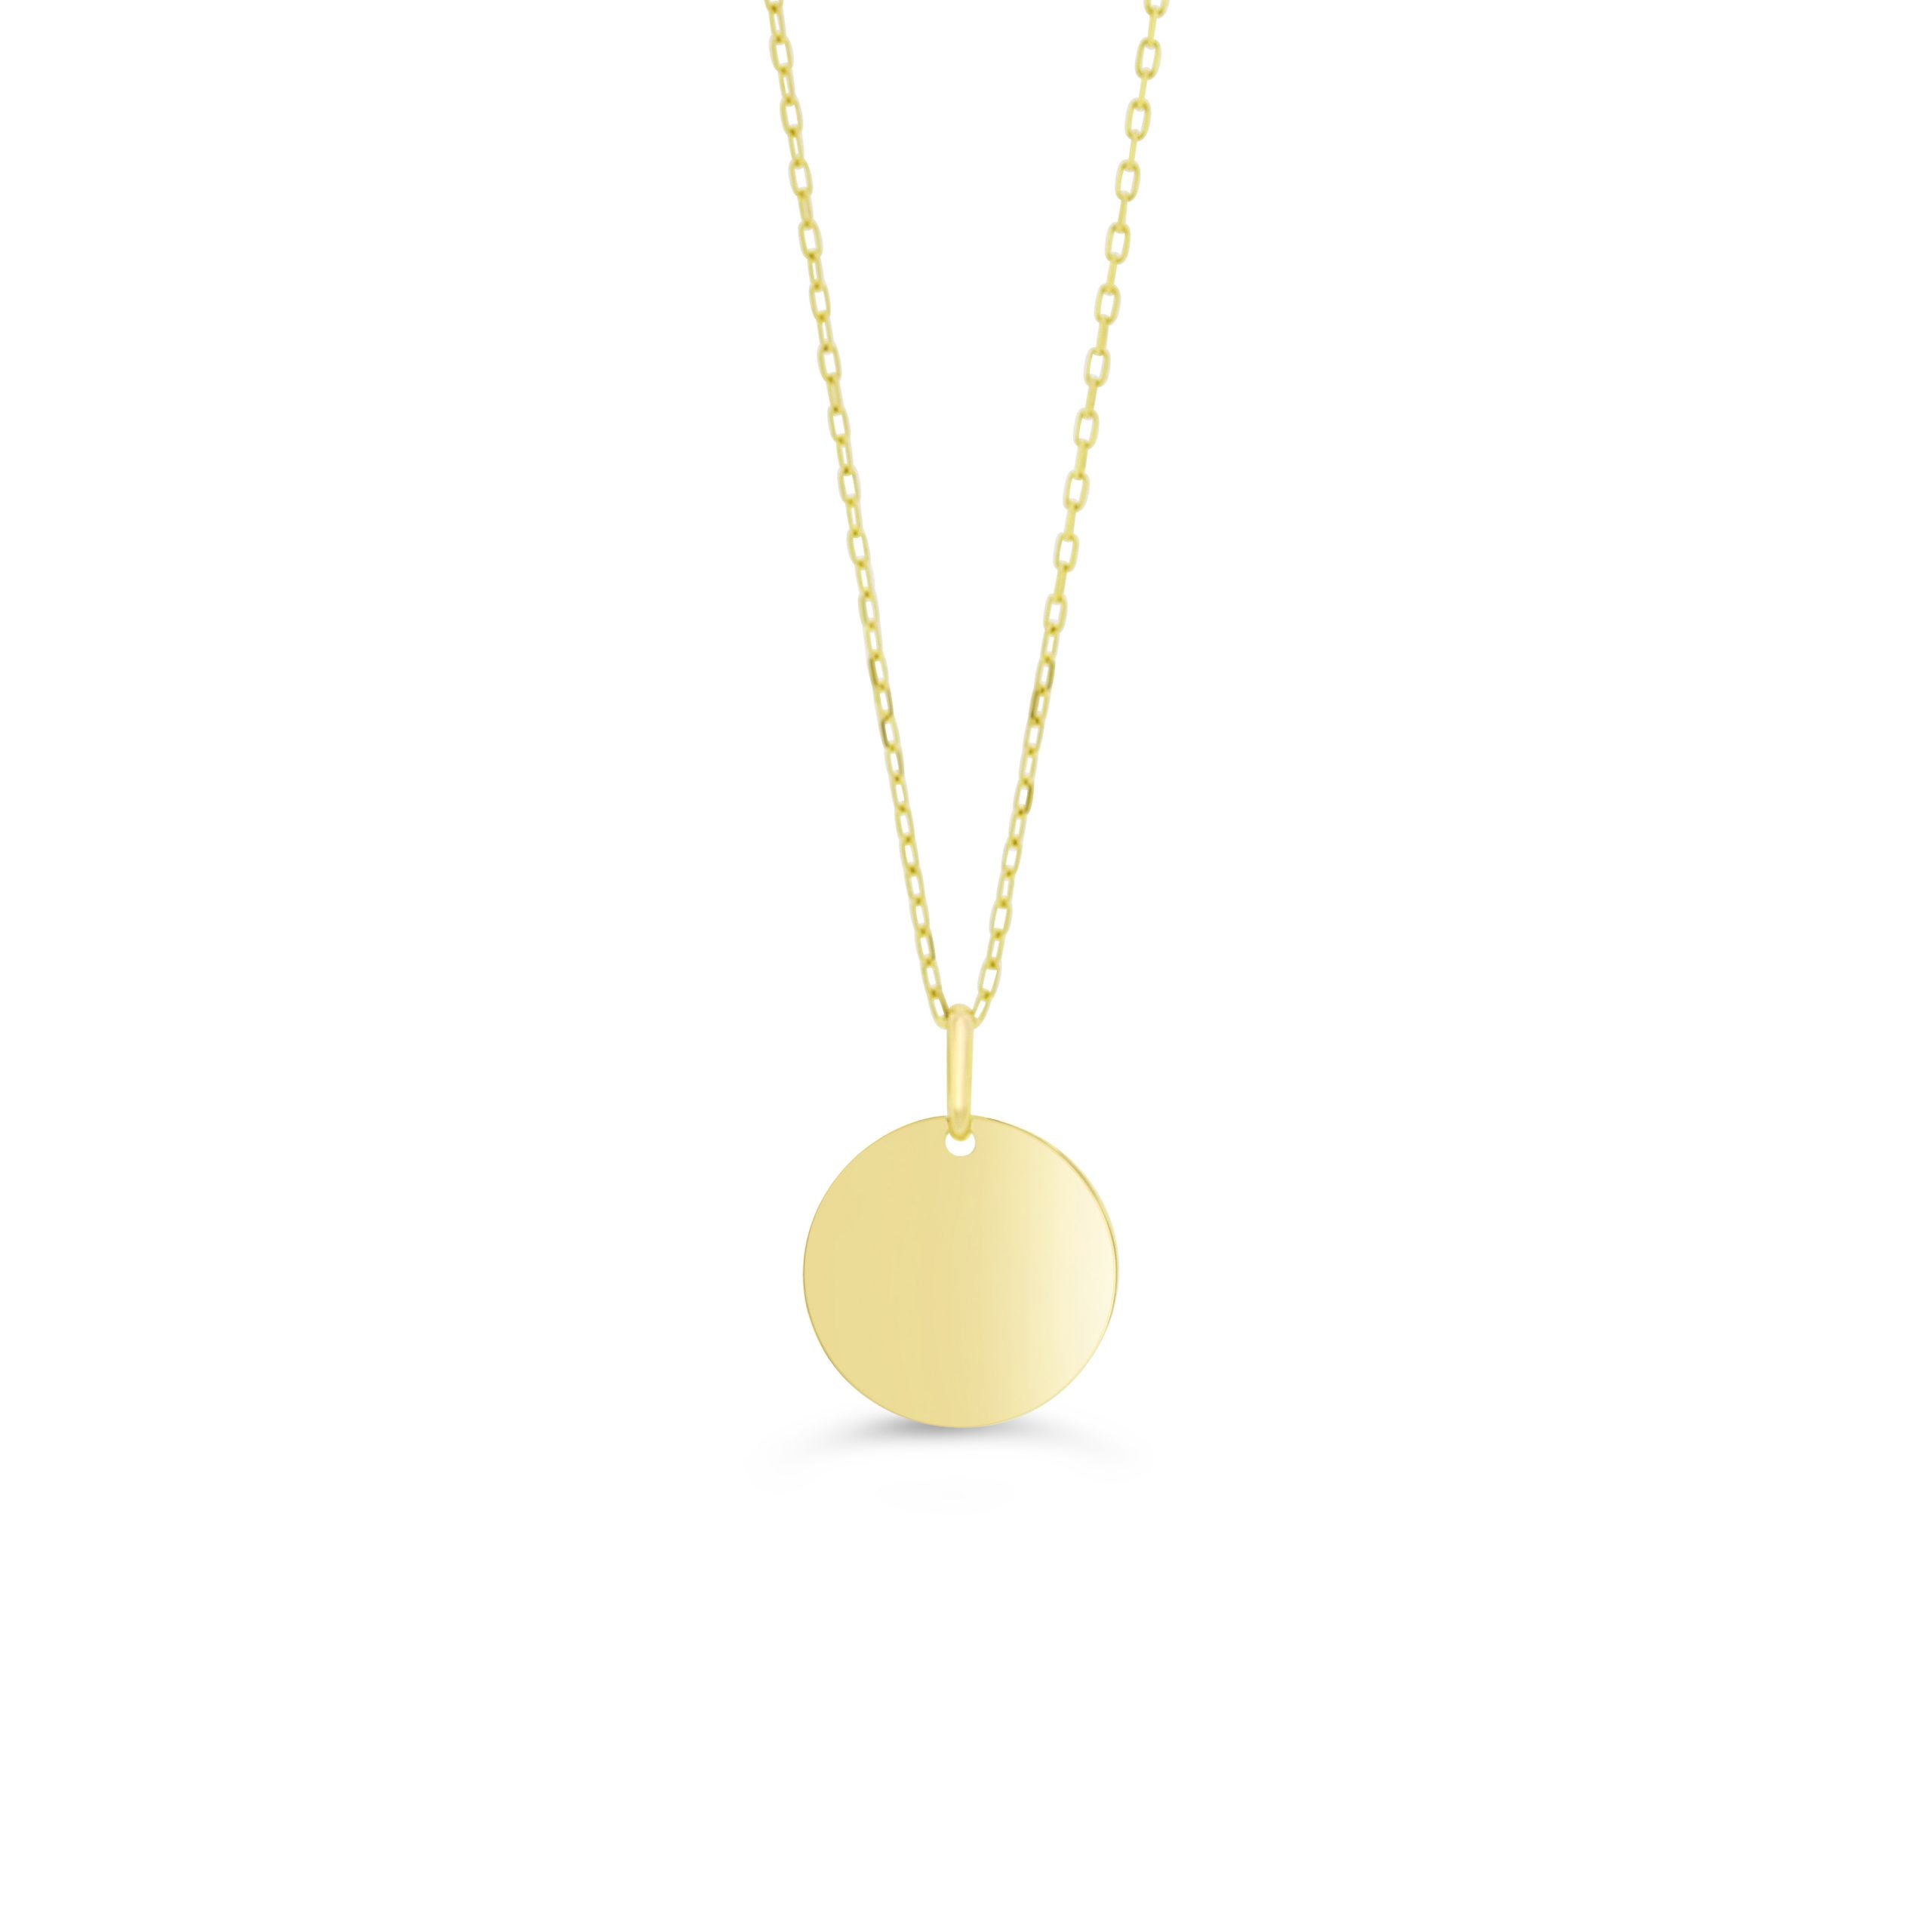 10K Yellow Gold Disk Necklace